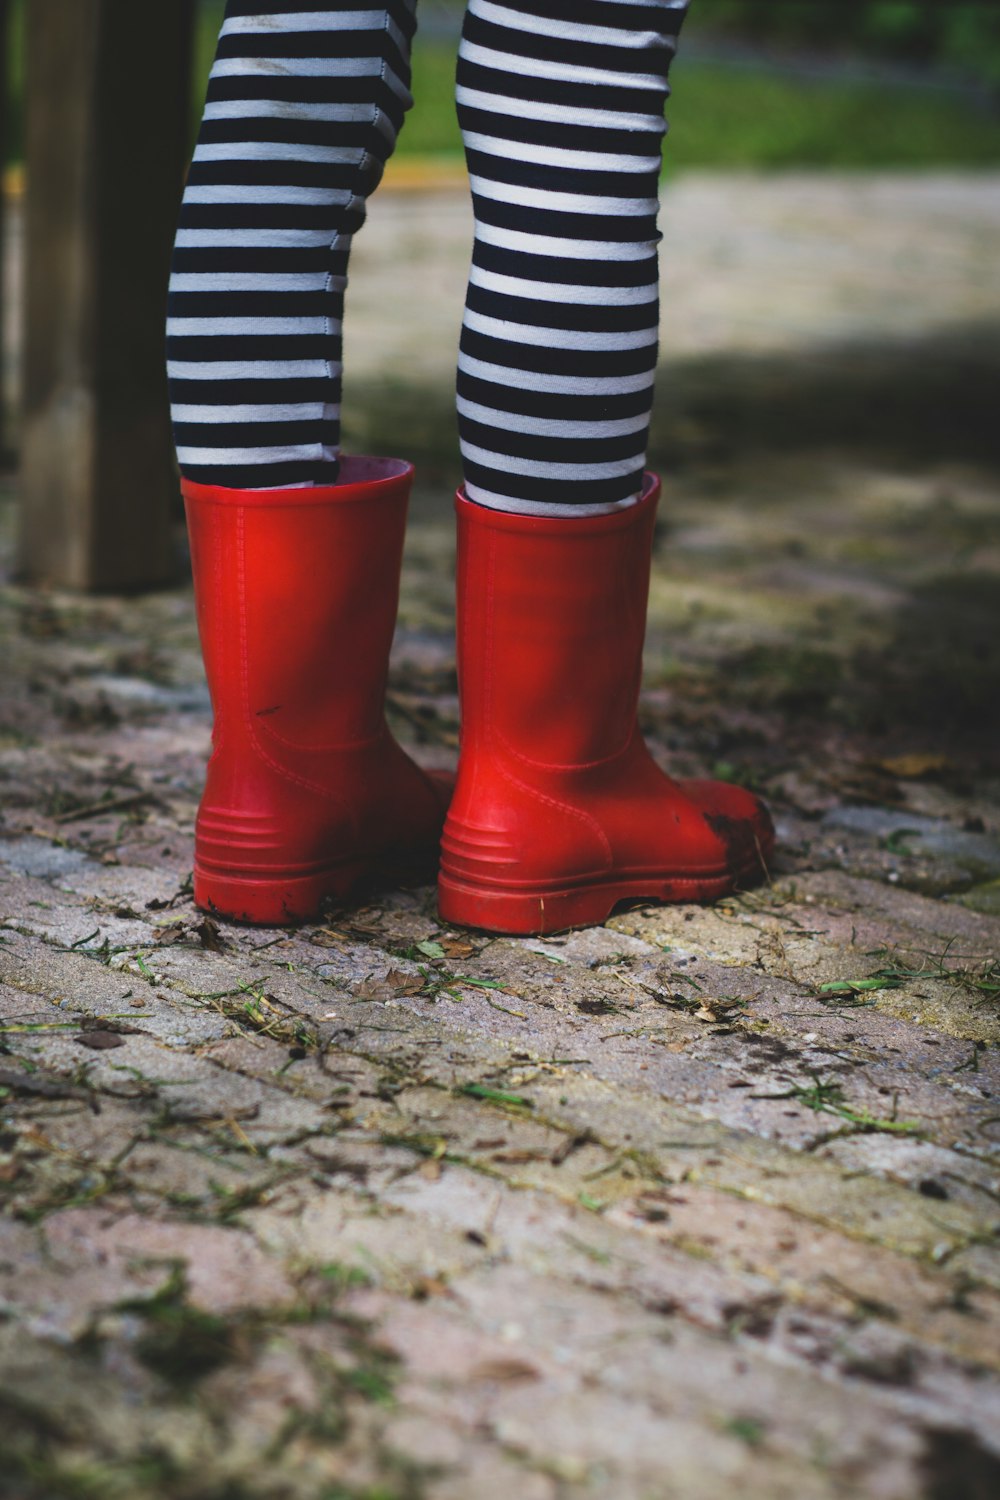 person wearing black and white striped socks and red rain boots standing on concrete pavement